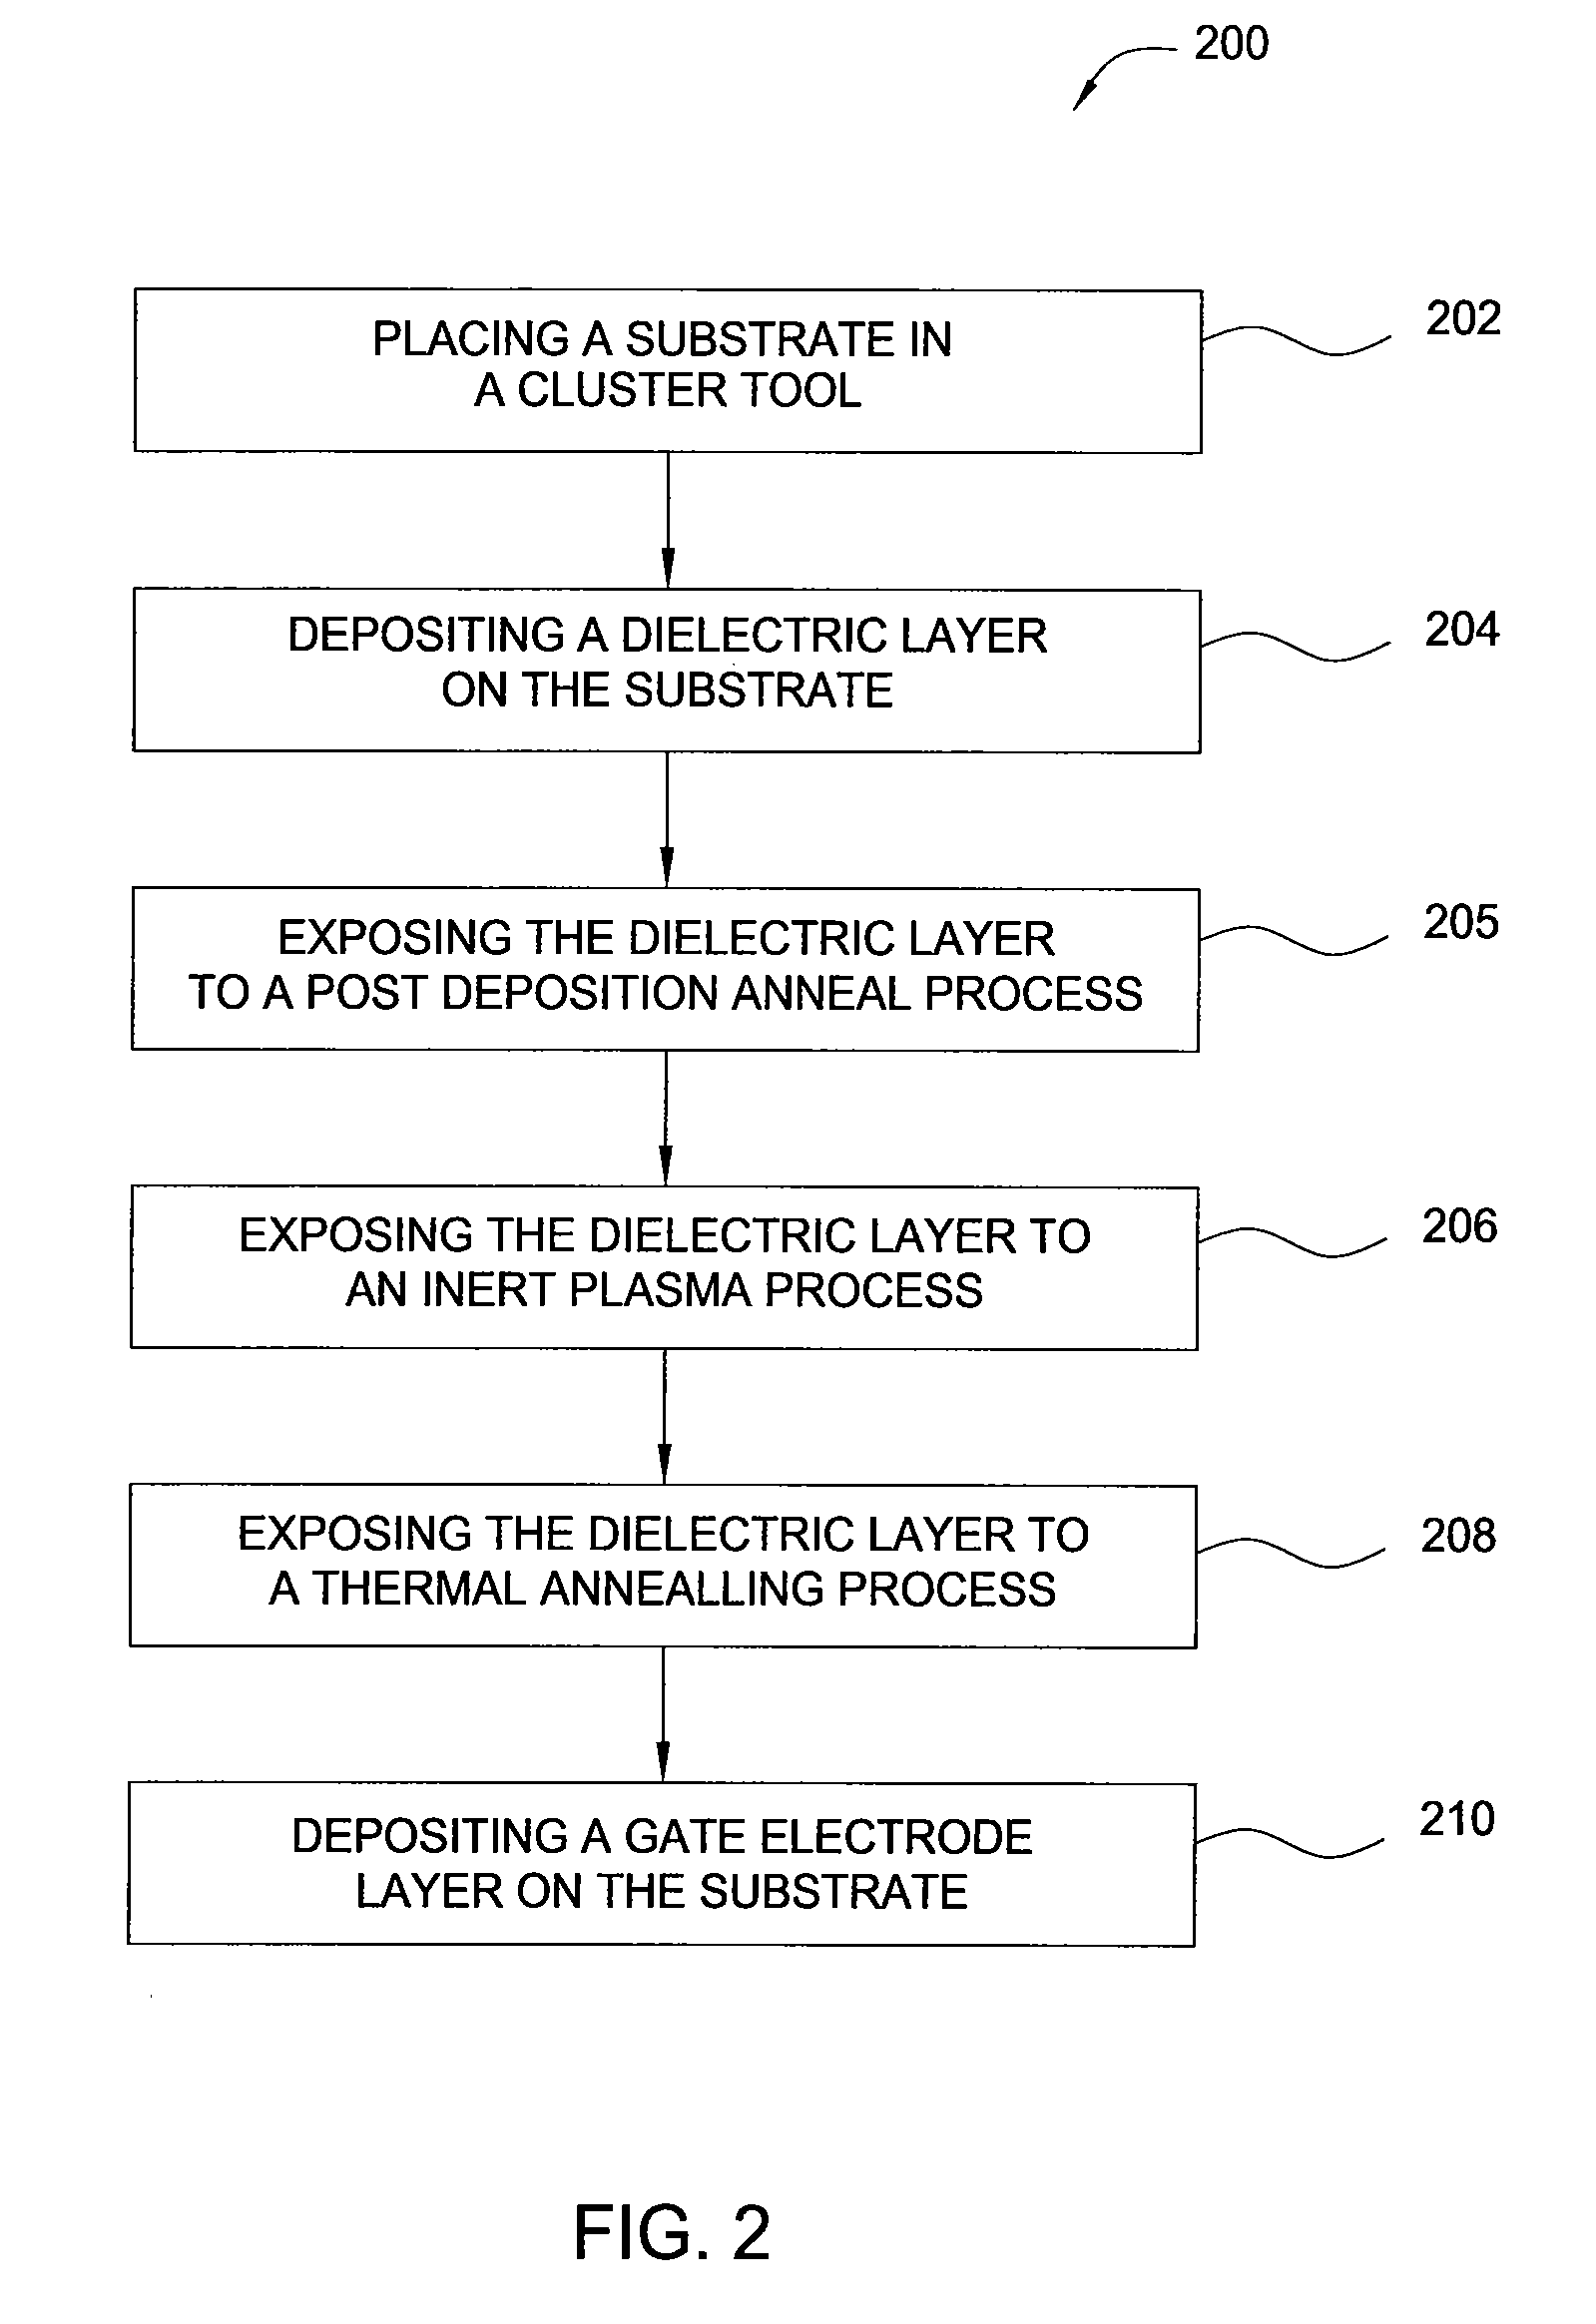 Software sequencer for integrated substrate processing system